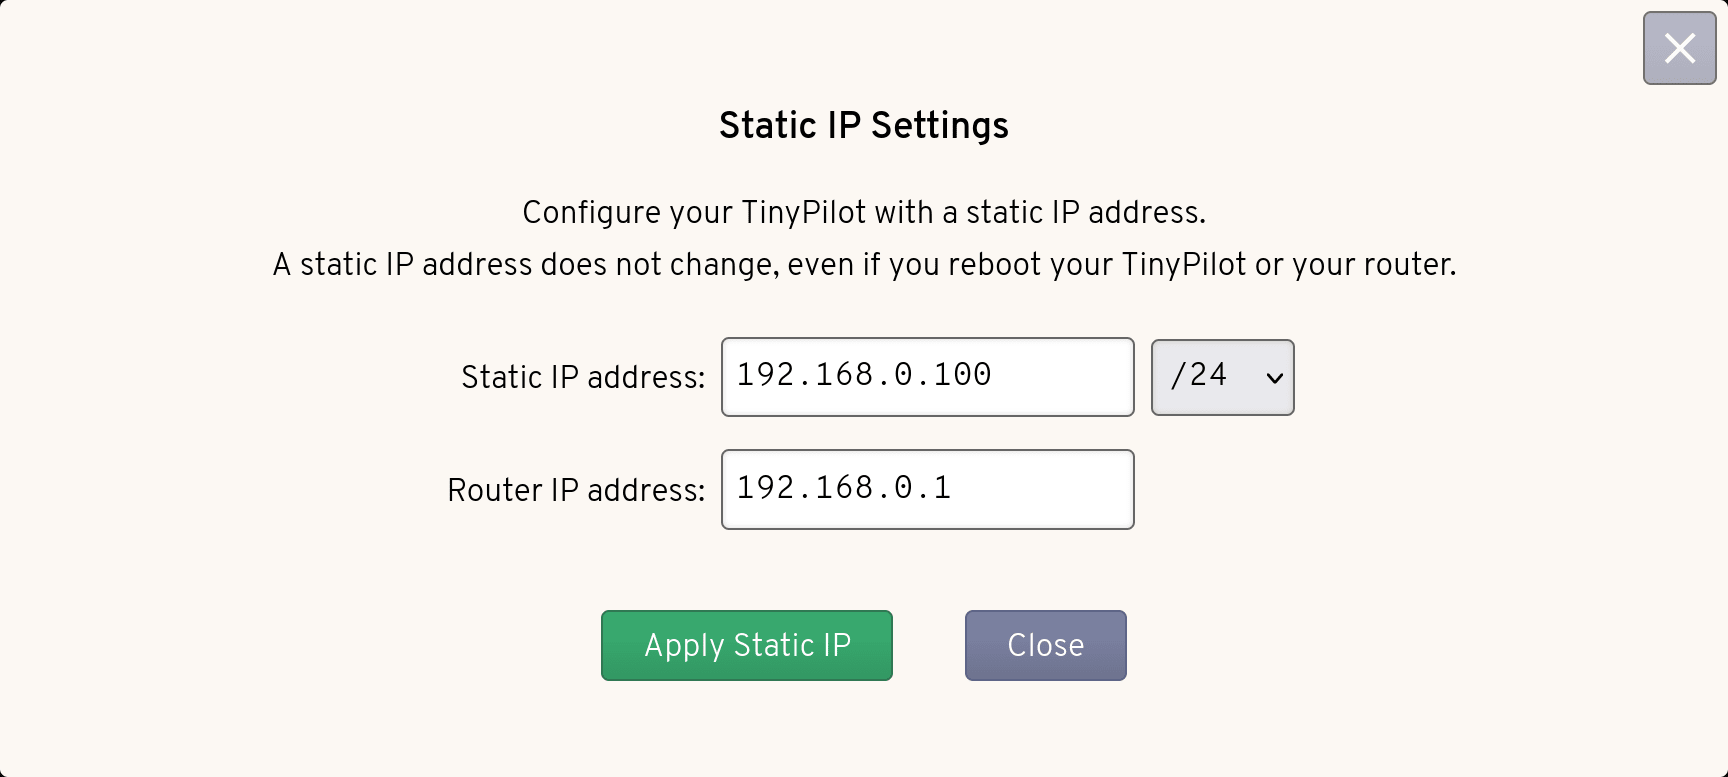 The TinyPilot Static IP menu is open, showing a 'Static IP address' text box and a 'Router IP address' text box for setting network details.